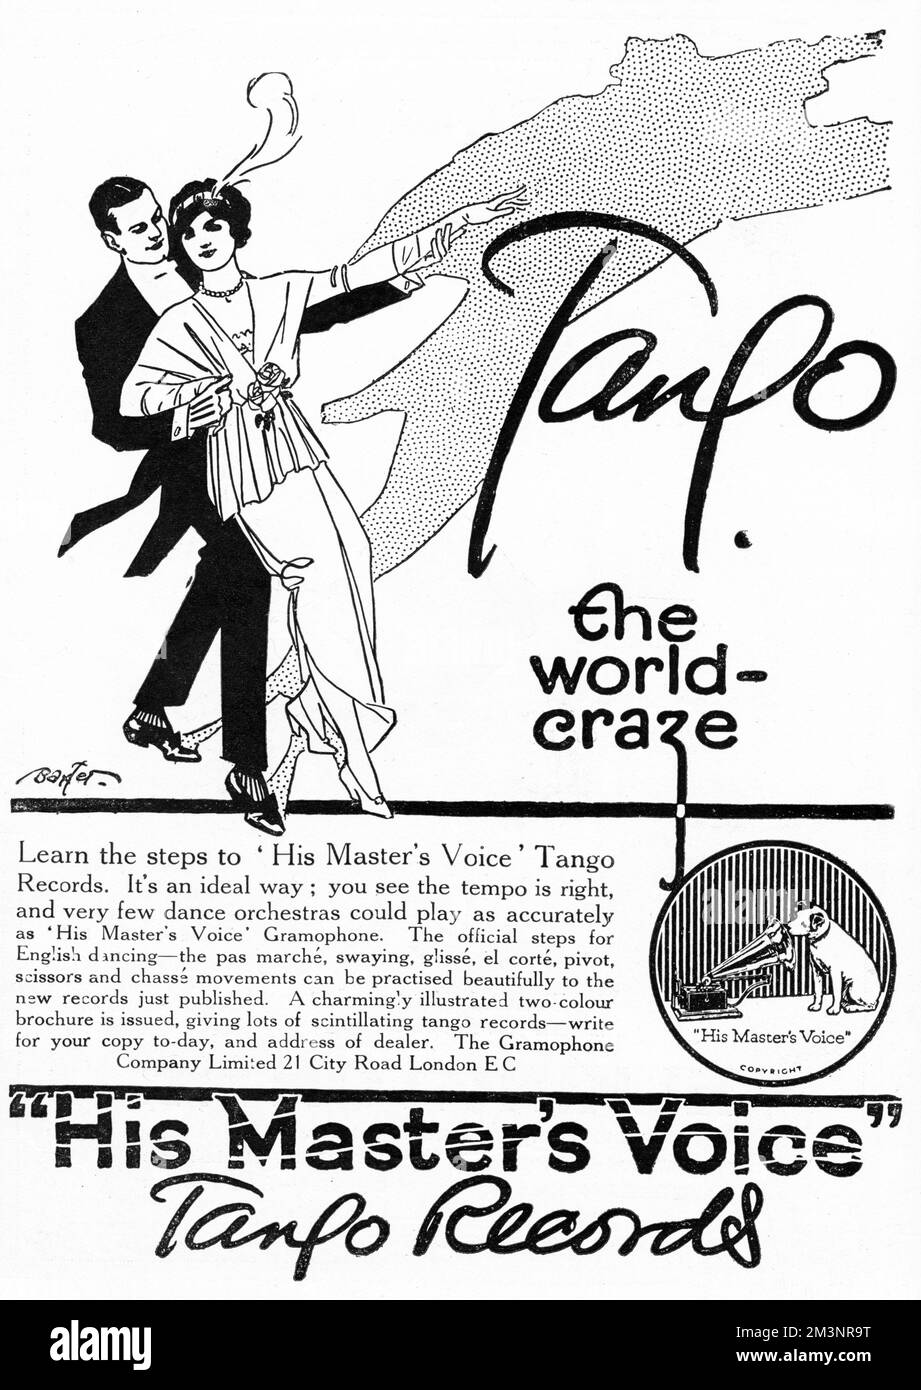 Advertisement for Tango records from His Masters Voice, encouraging people to learn the steps to this new dance craze with the help of their records.  The tango took Britain by storm in 1913.     Date: 1913 Stock Photo